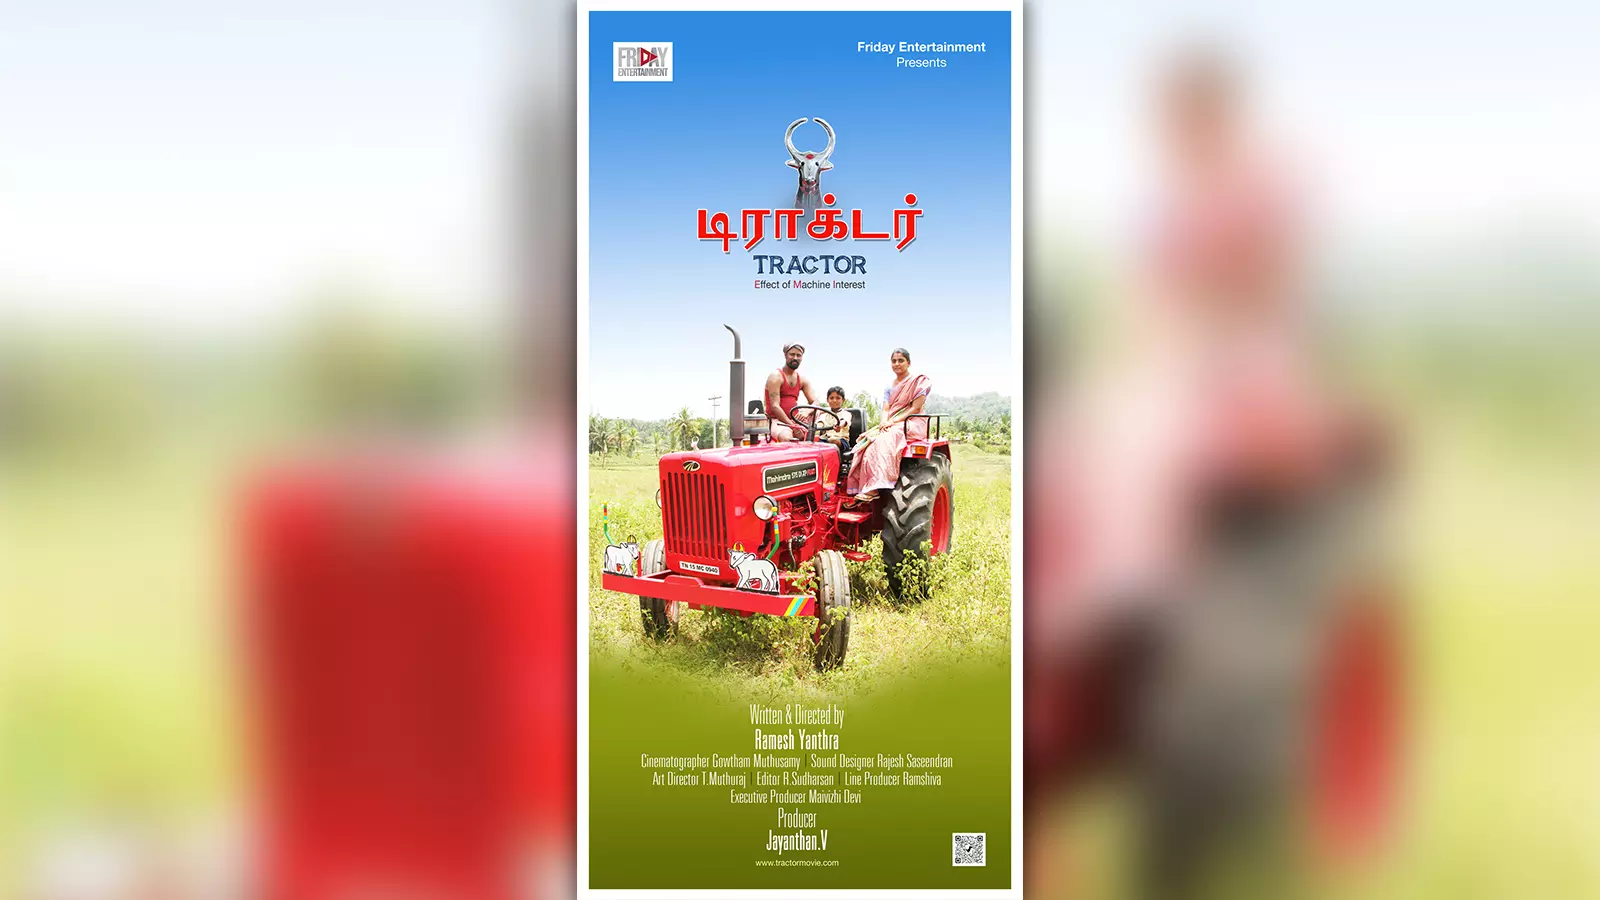 A poster of the film Tractor.